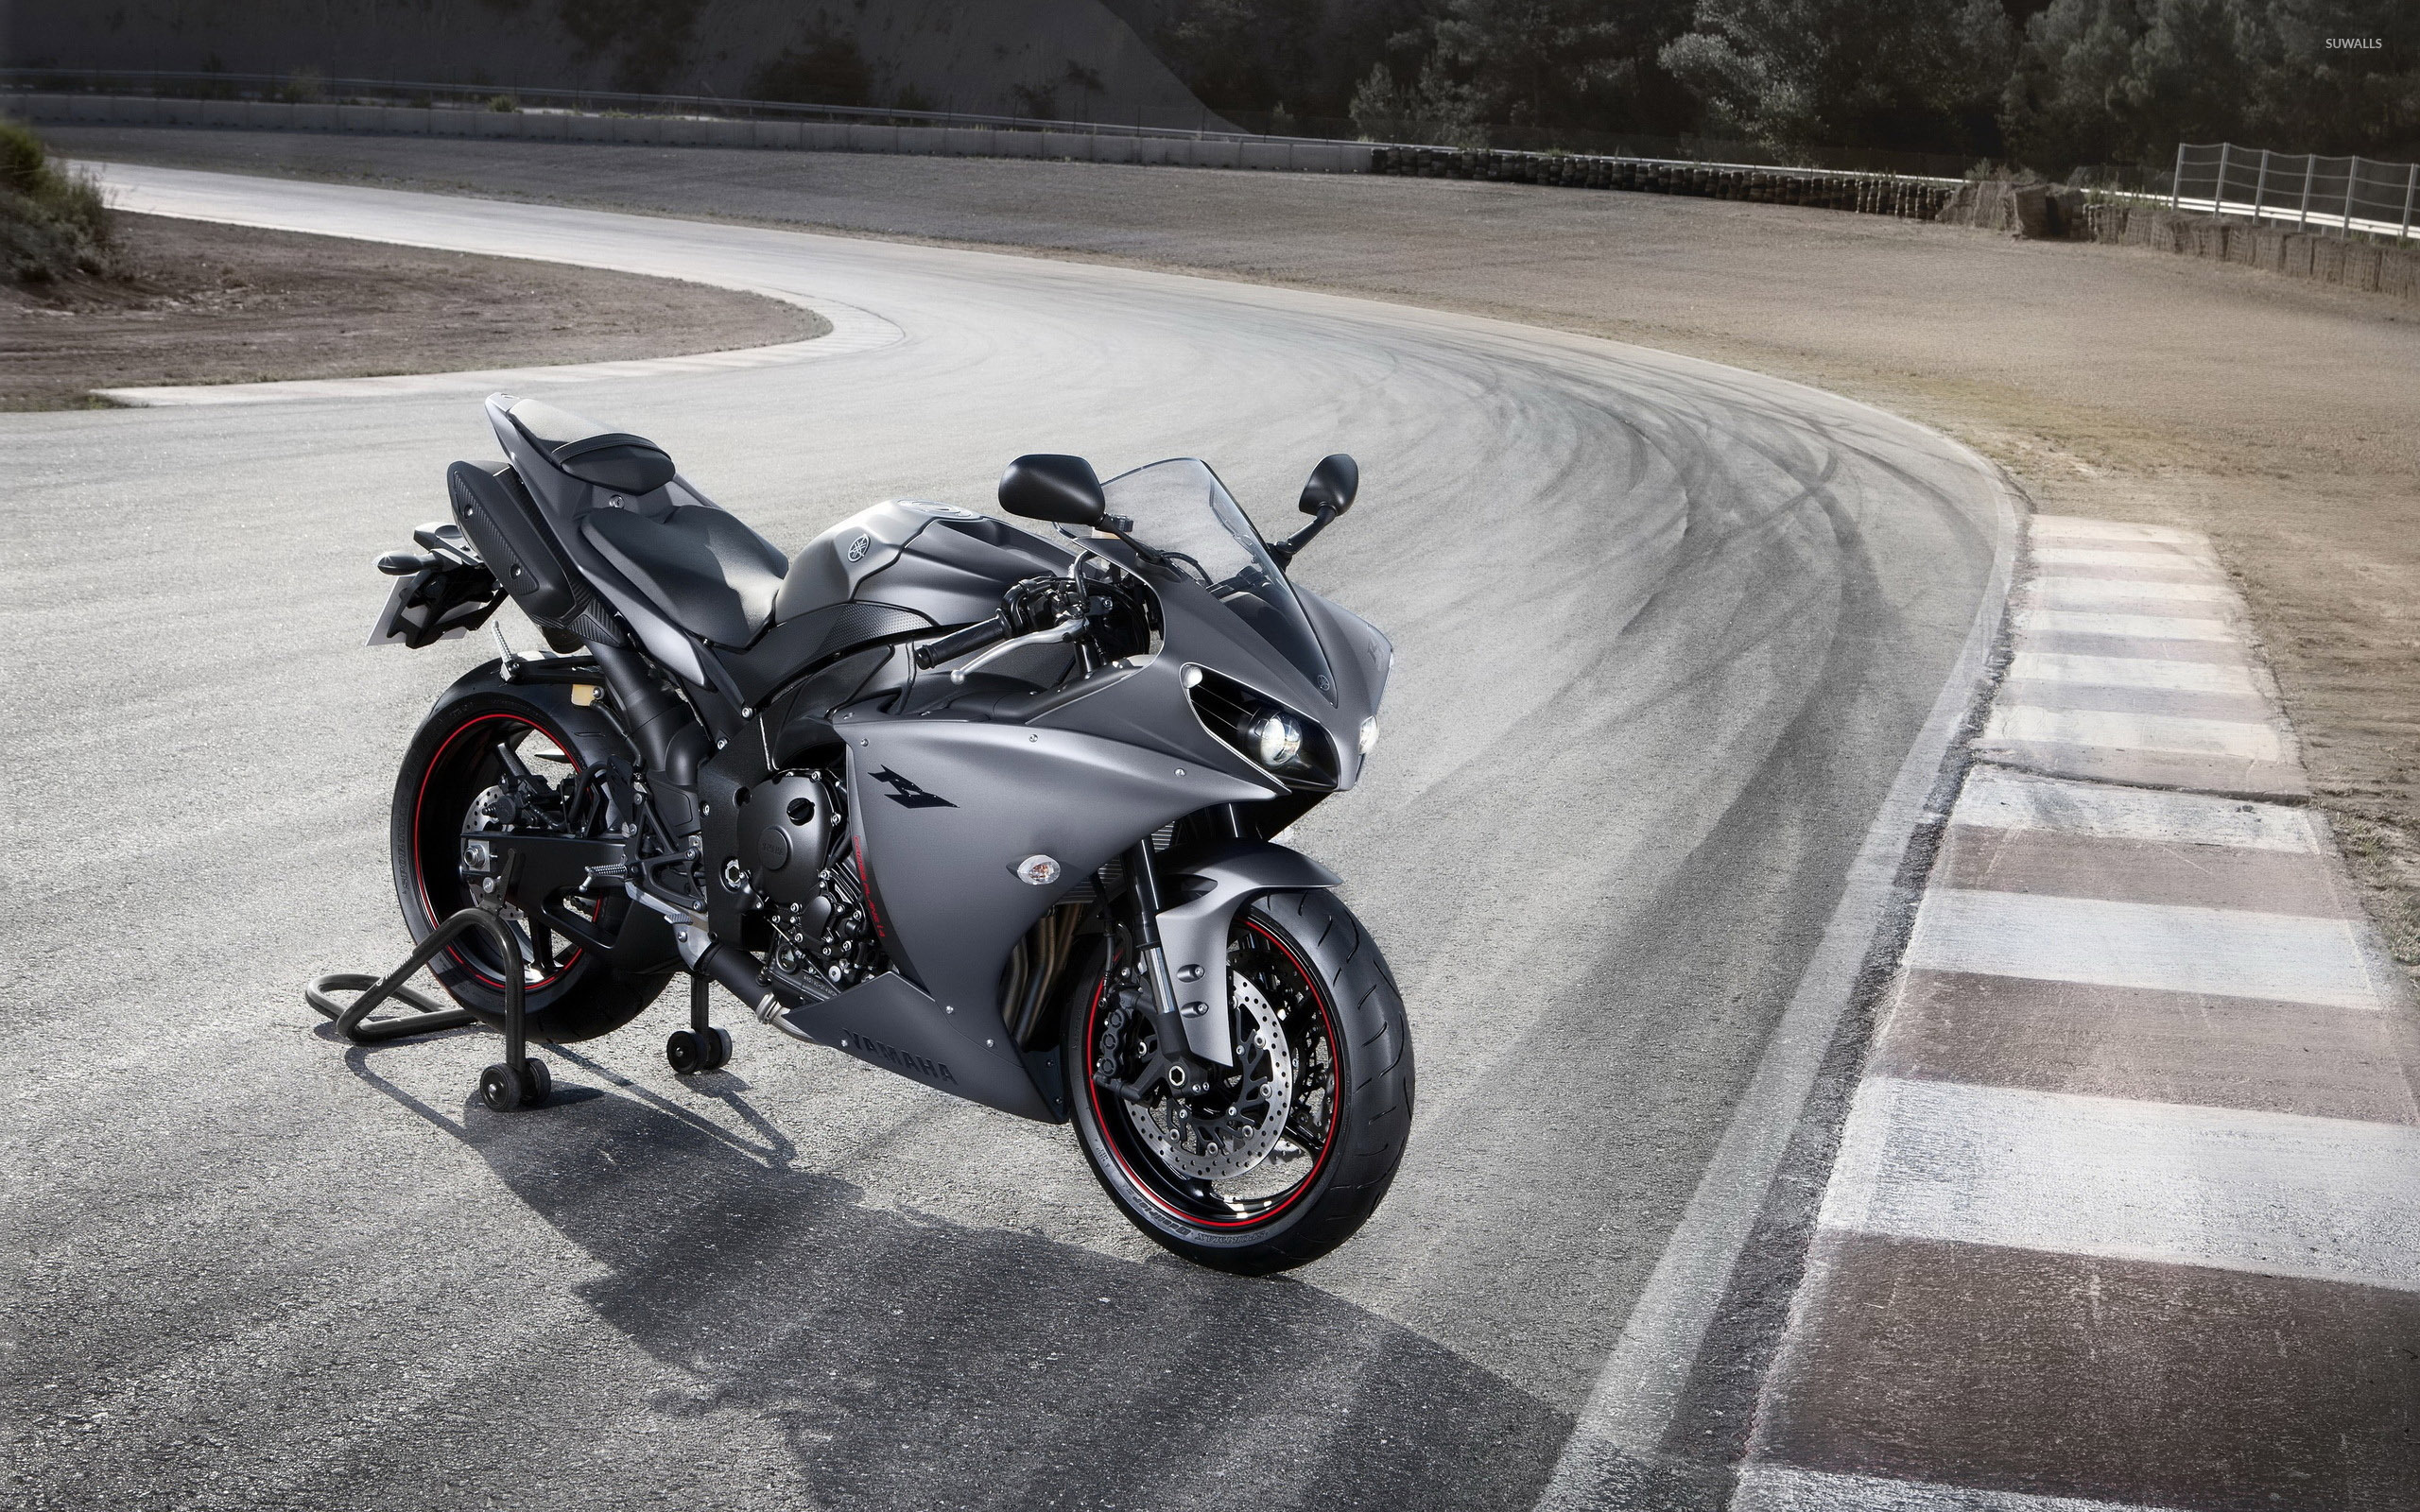 Silver Yamaha YZF-R1 on the racing track wallpaper - Motorcycle